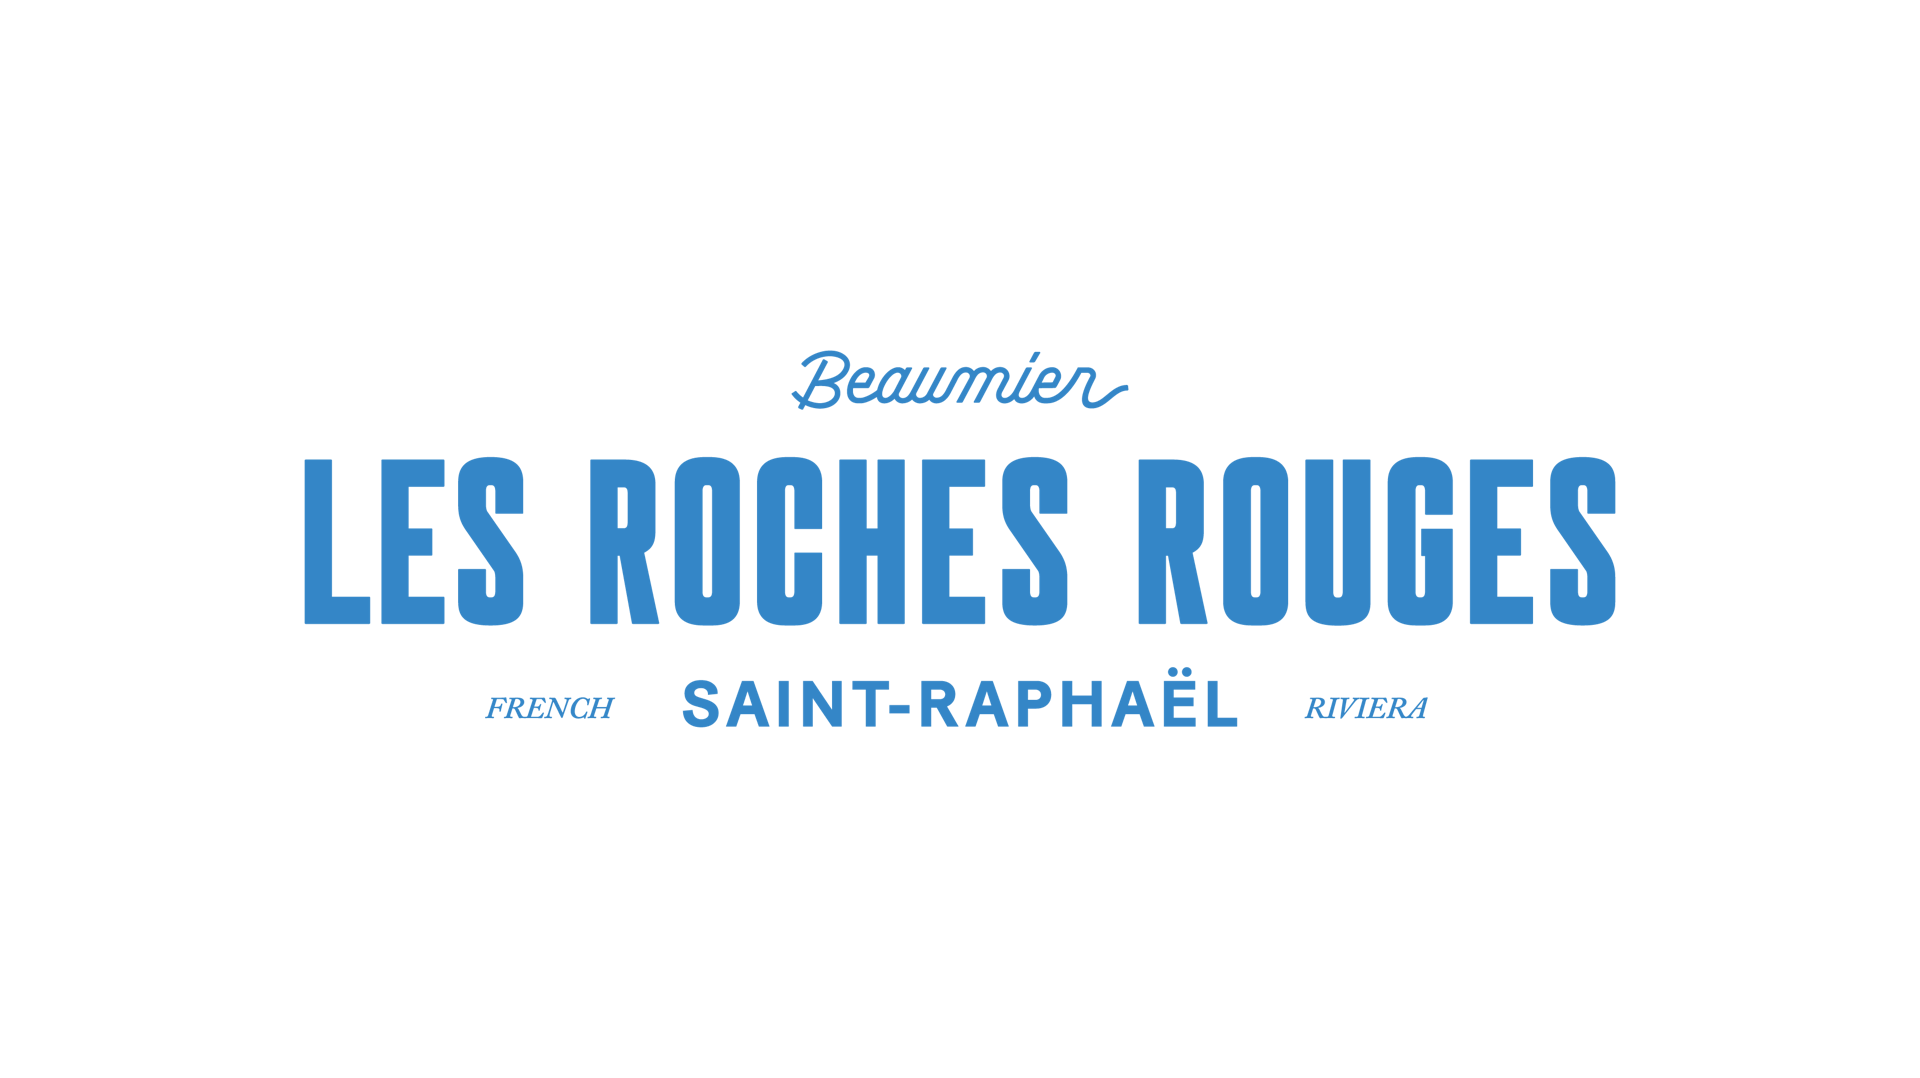 HOTEL LES ROCHES ROUGES